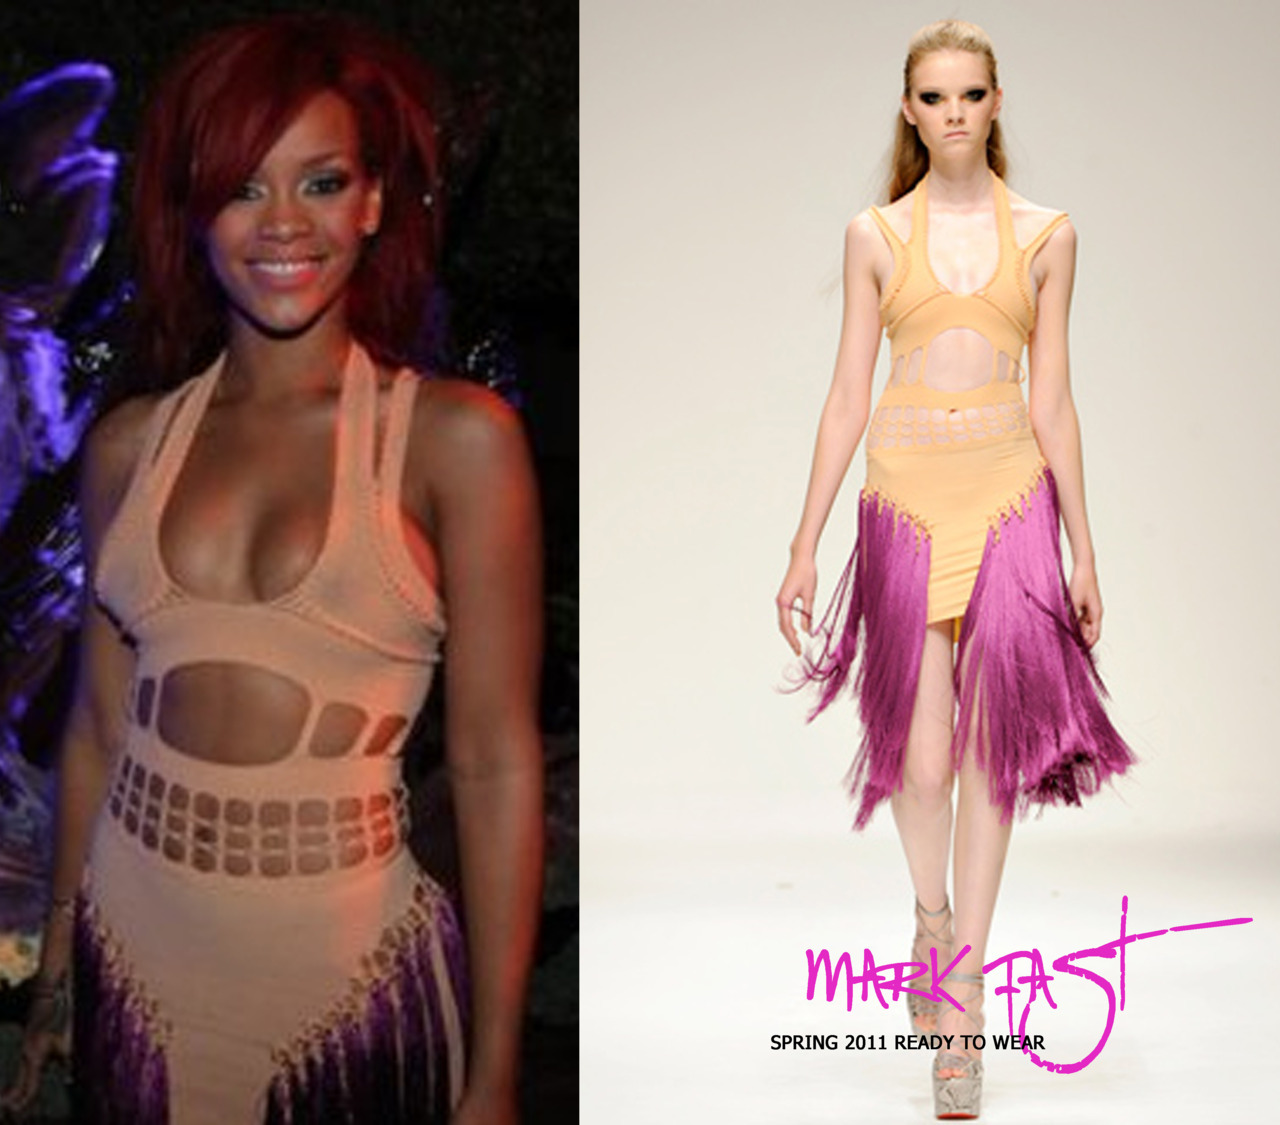 Rihanna during her birthday party giving a little carnival feeling with her outfit by designer Mark Fast from his ready to wear 2011 collection.
Shout out to Justin Rolle for helping me identify the dress :)